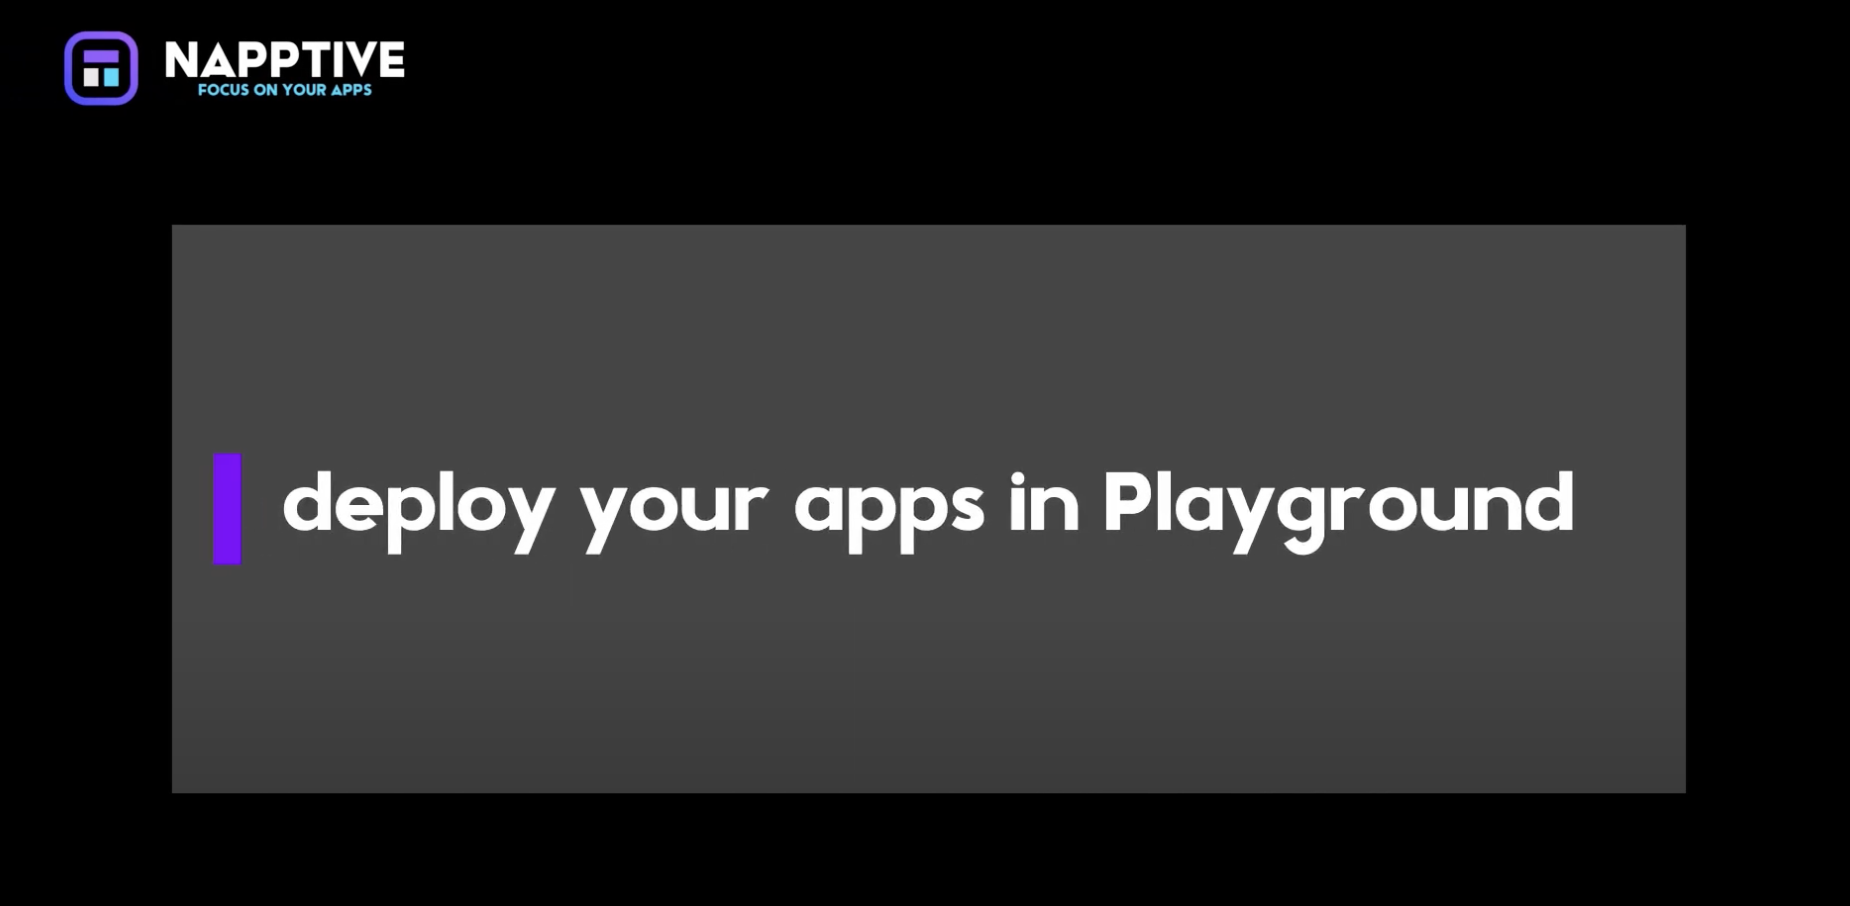 Napptive Playground v1.0 - Learn how to create, deploy, and manage your first app with NAPPTIVE Playground v1.0